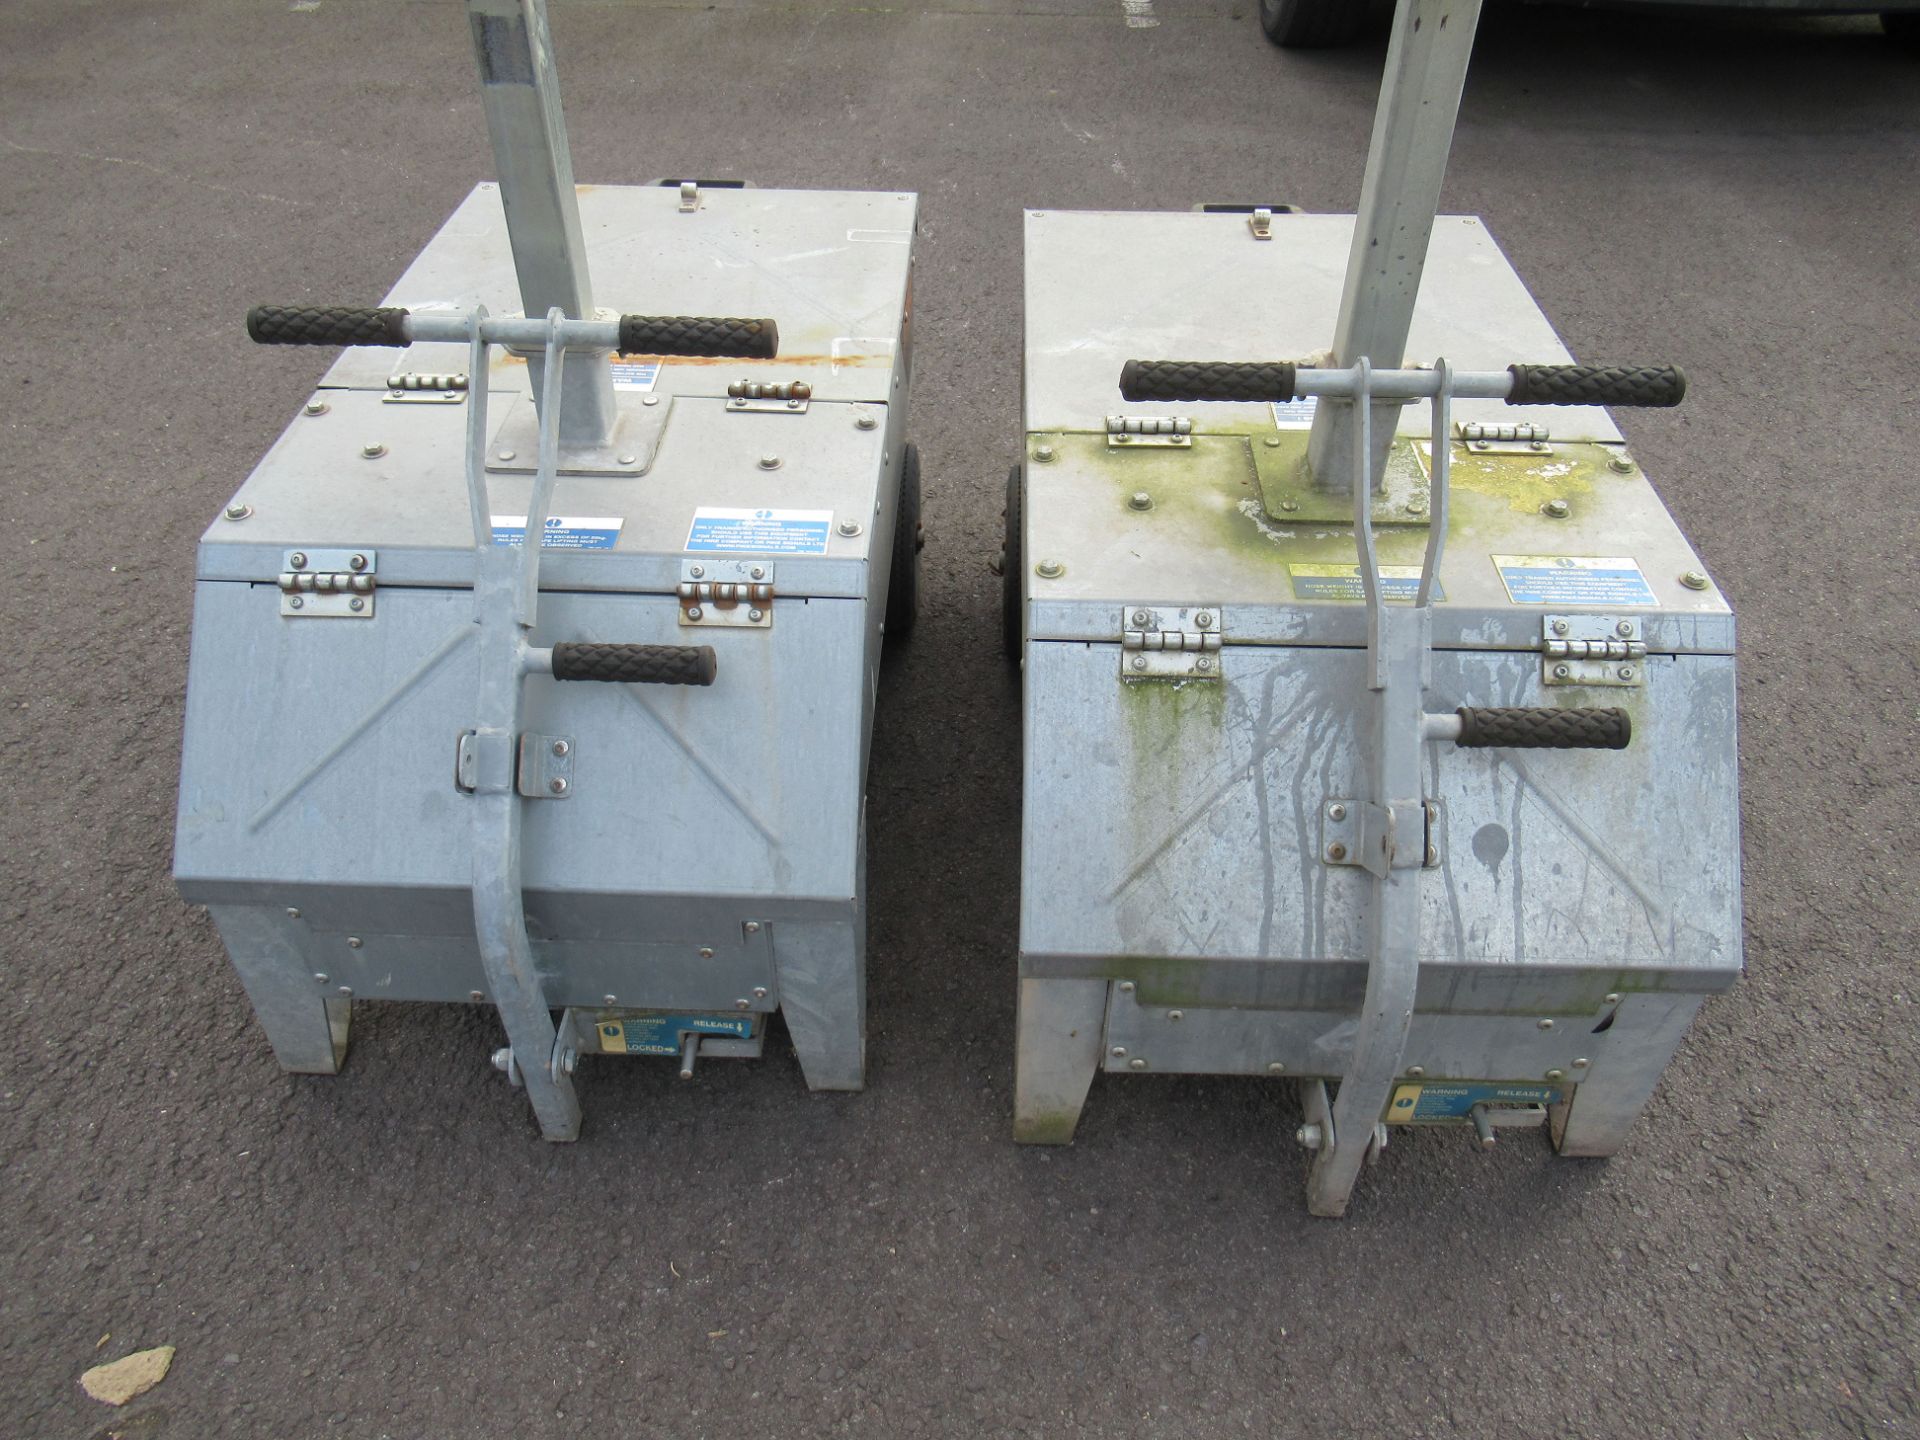 A Pair of Pike Signals Ltd "Pedestrian" Battery Powered Portable Light Units - Image 4 of 7